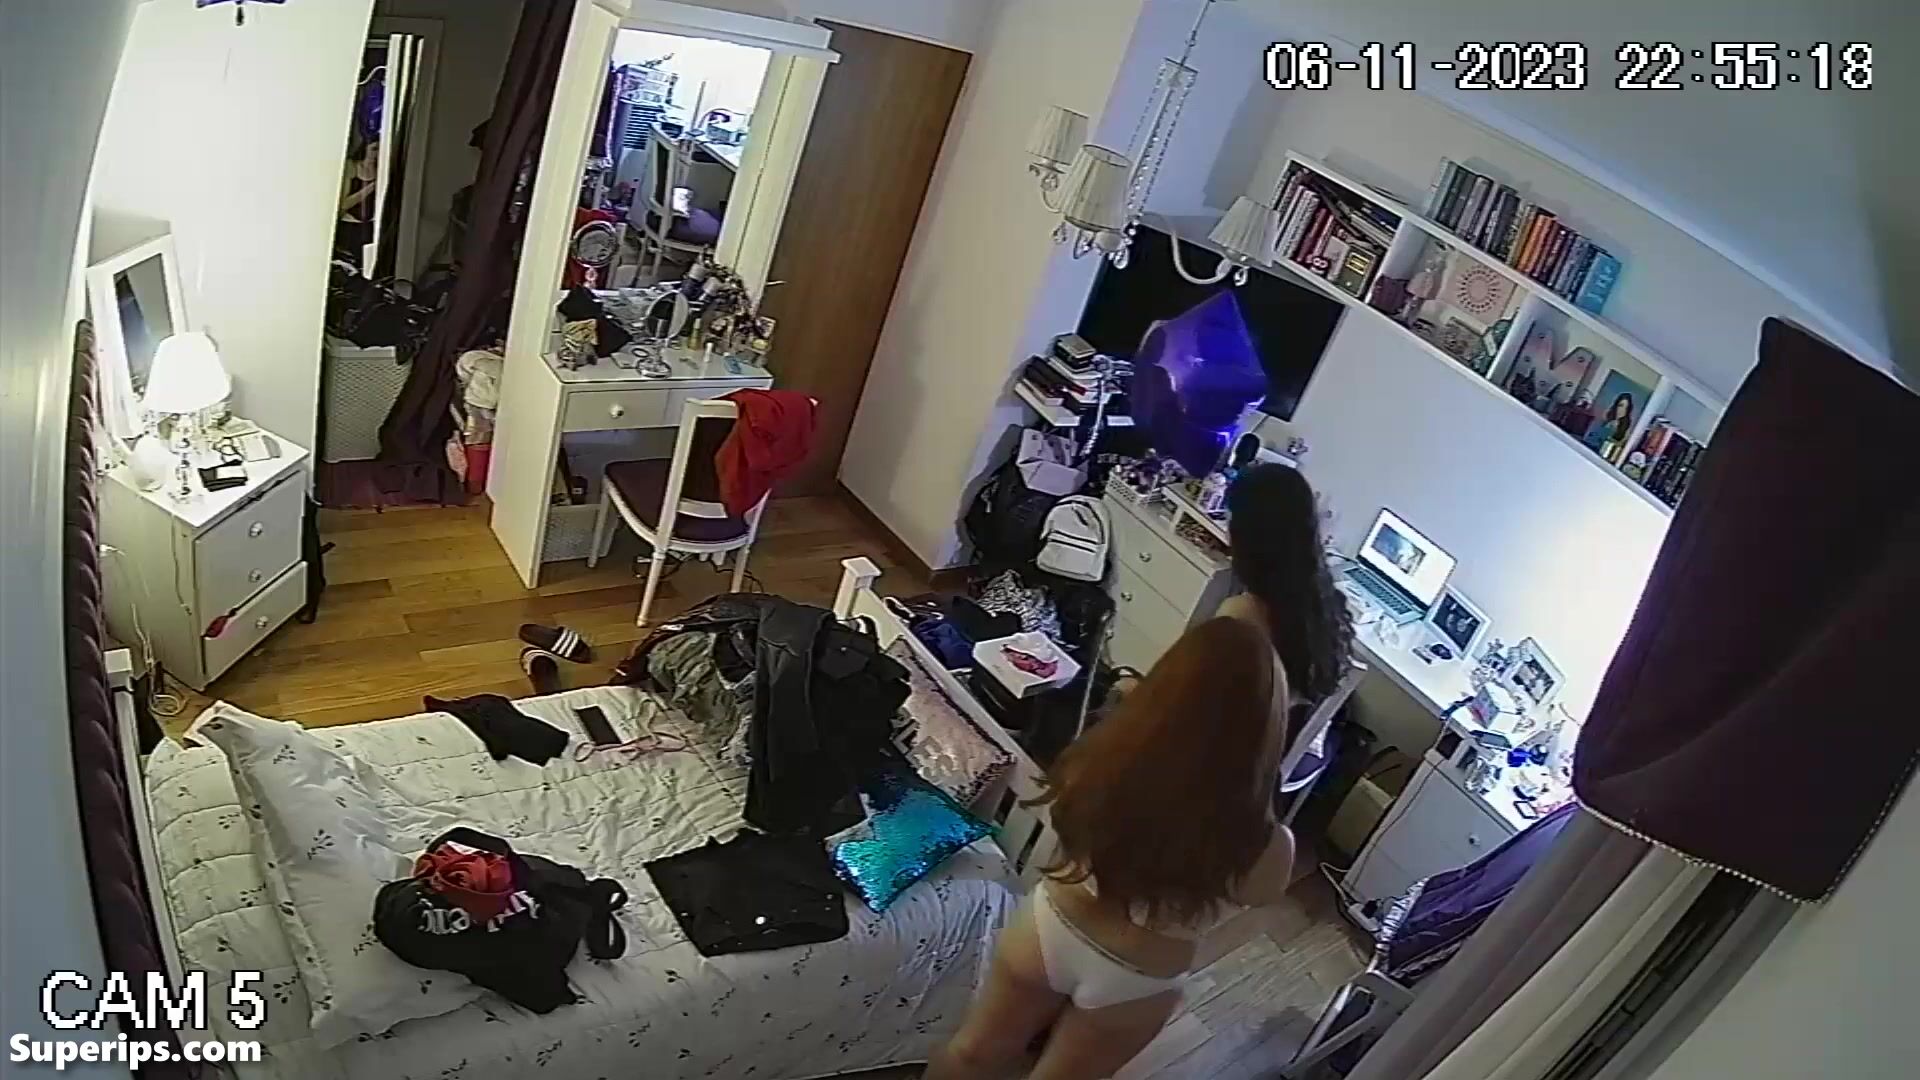 British teenage sisters change clothes together _2